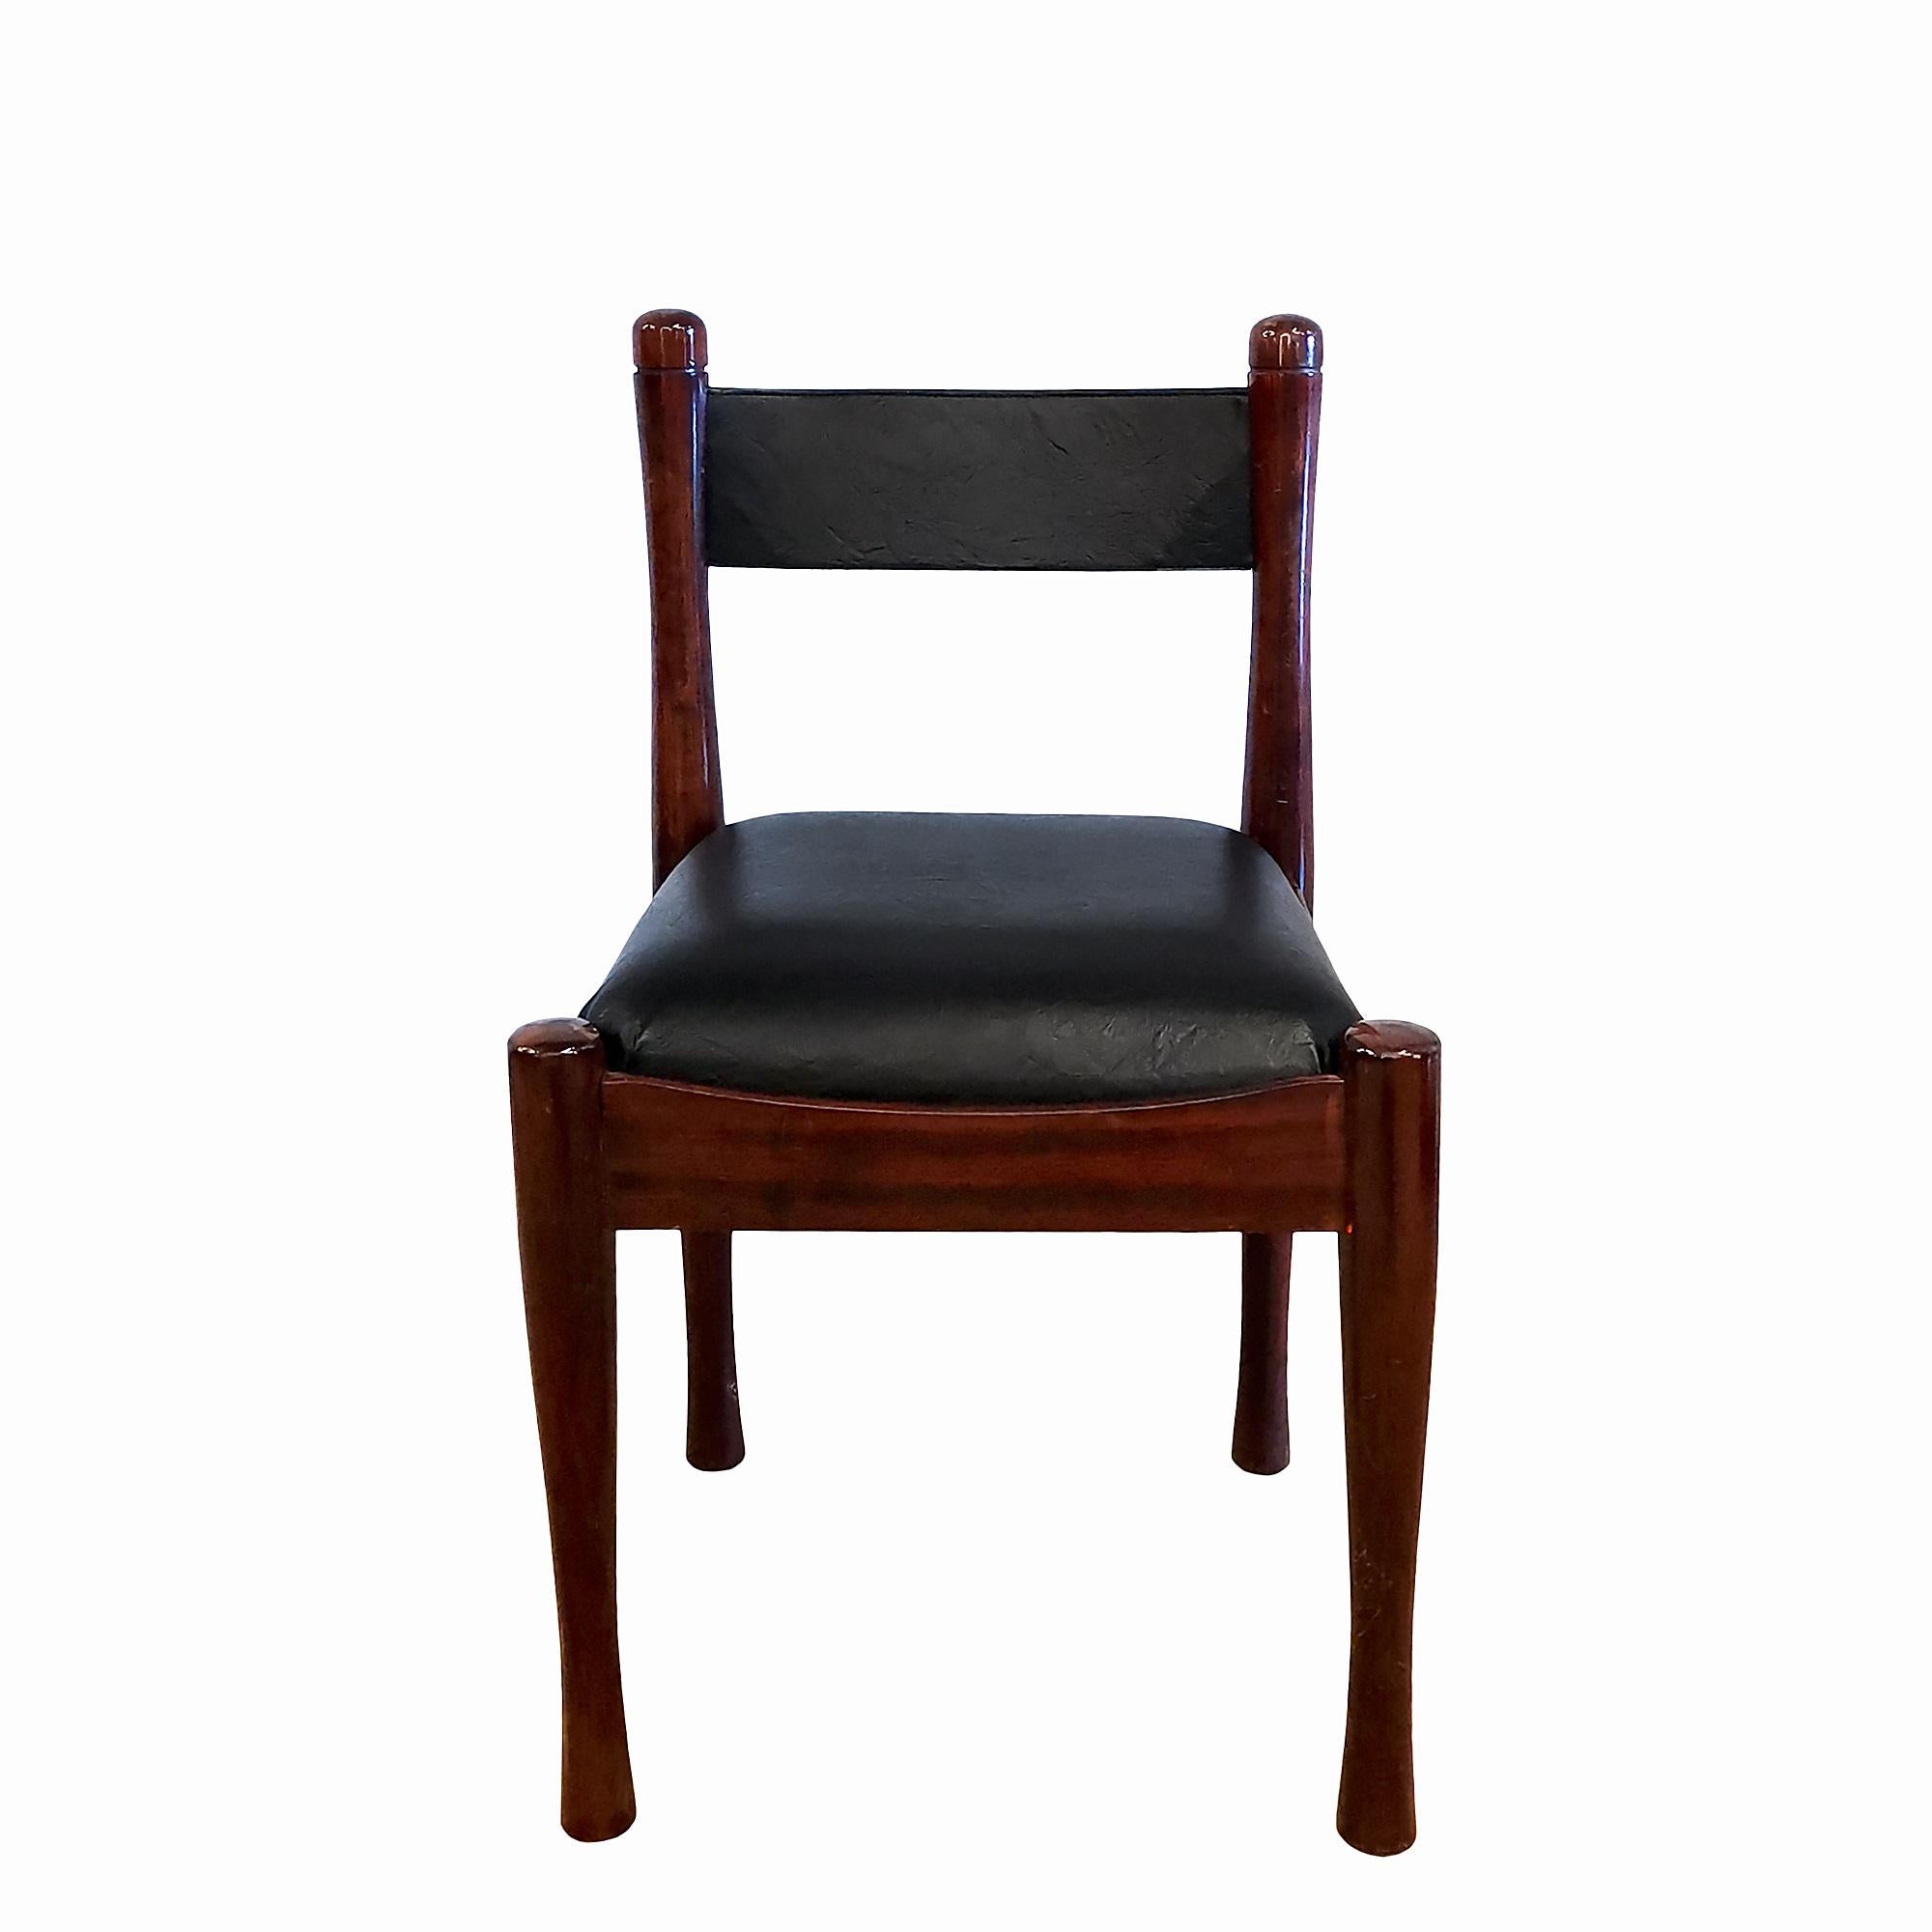 Italian Set of Mid-Century Modern Chairs in Mahogany by Silvio Coppola - Italy, 1970 For Sale